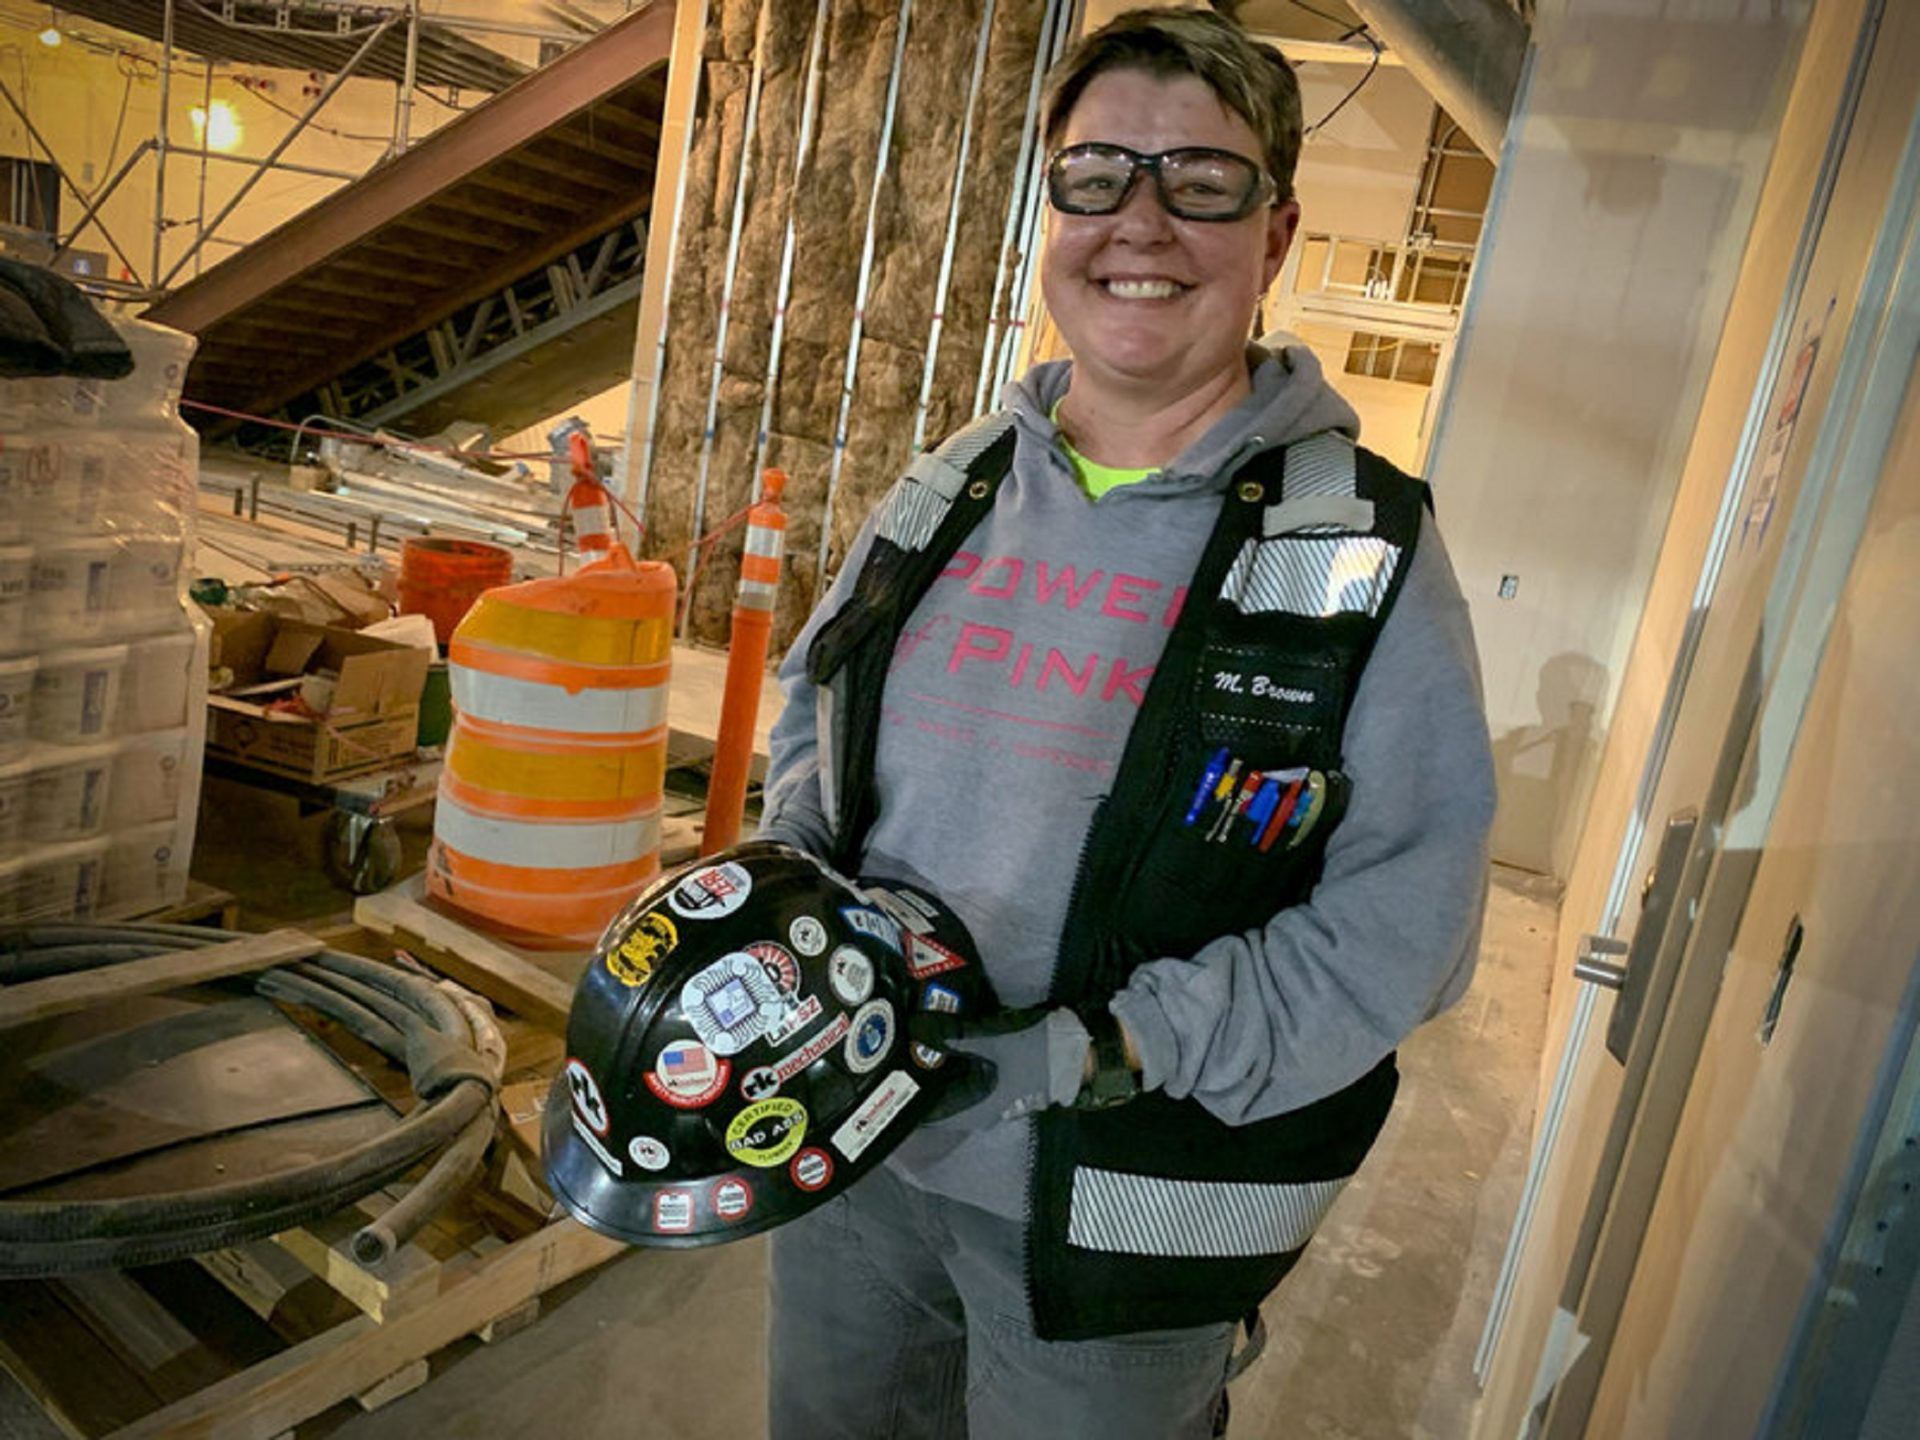 Over the course of 31 years working in construction, Michelle Brown has endured three co-workers' suicides. Her hard hat bears the name "Momma," recognition of her caring approach on the job.